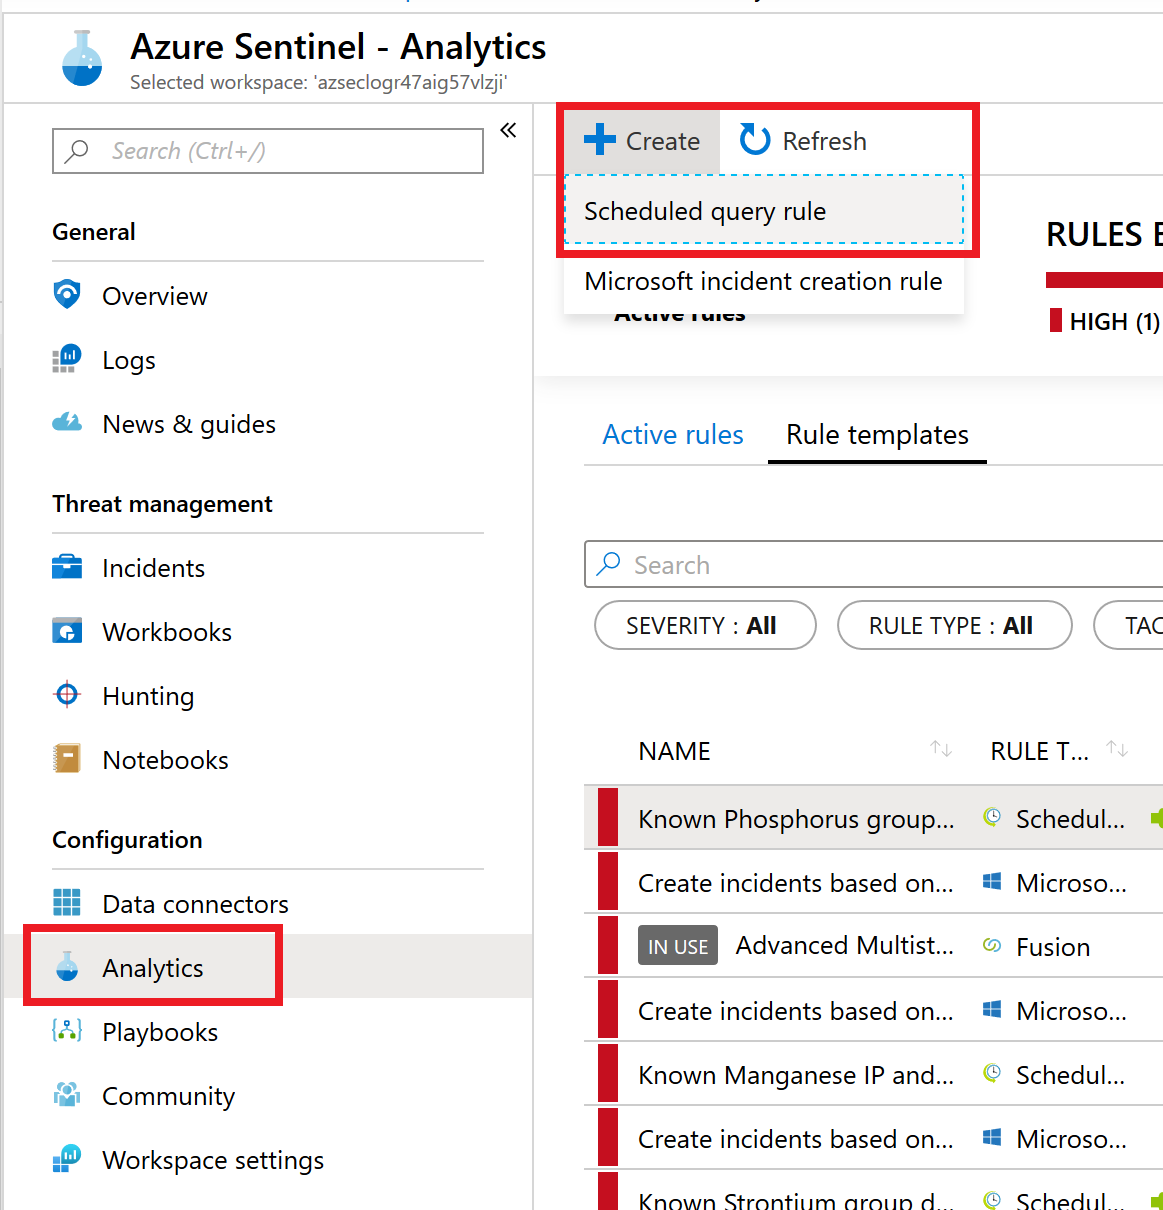 In the left menu beneath Configuration the Analytics item is selected. To the right, the + Create button is expanded and the Scheduled query rule item is selected.